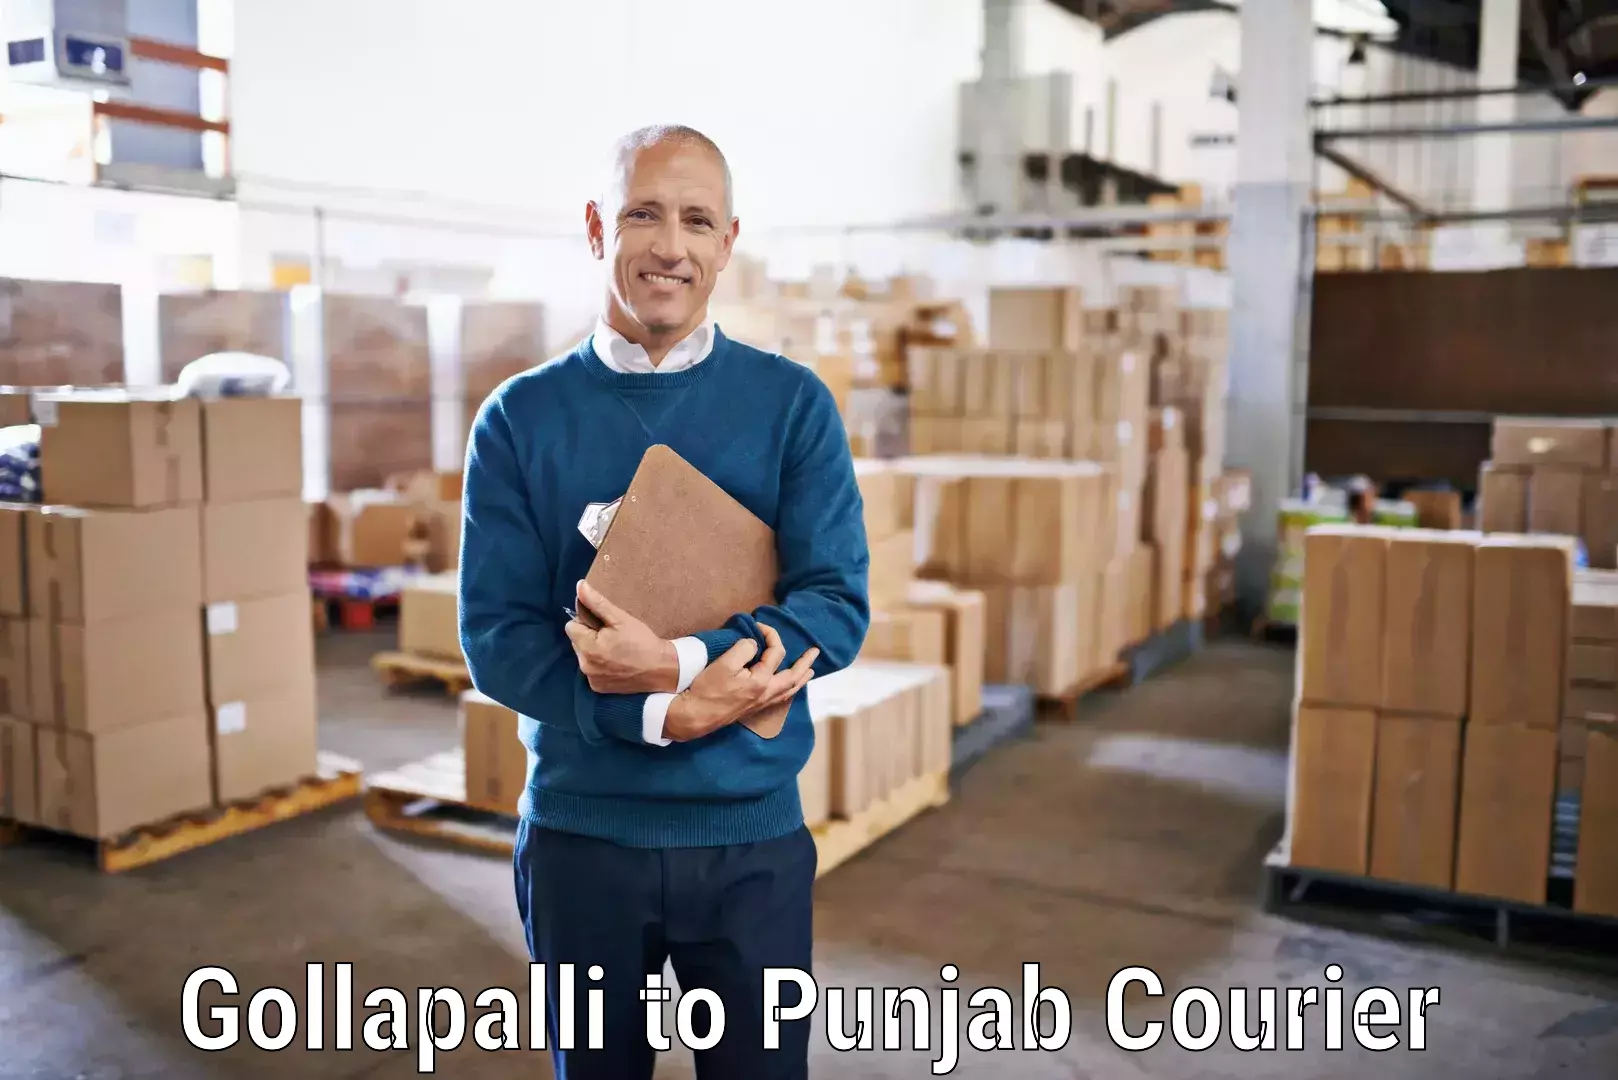 On-call courier service Gollapalli to Faridkot